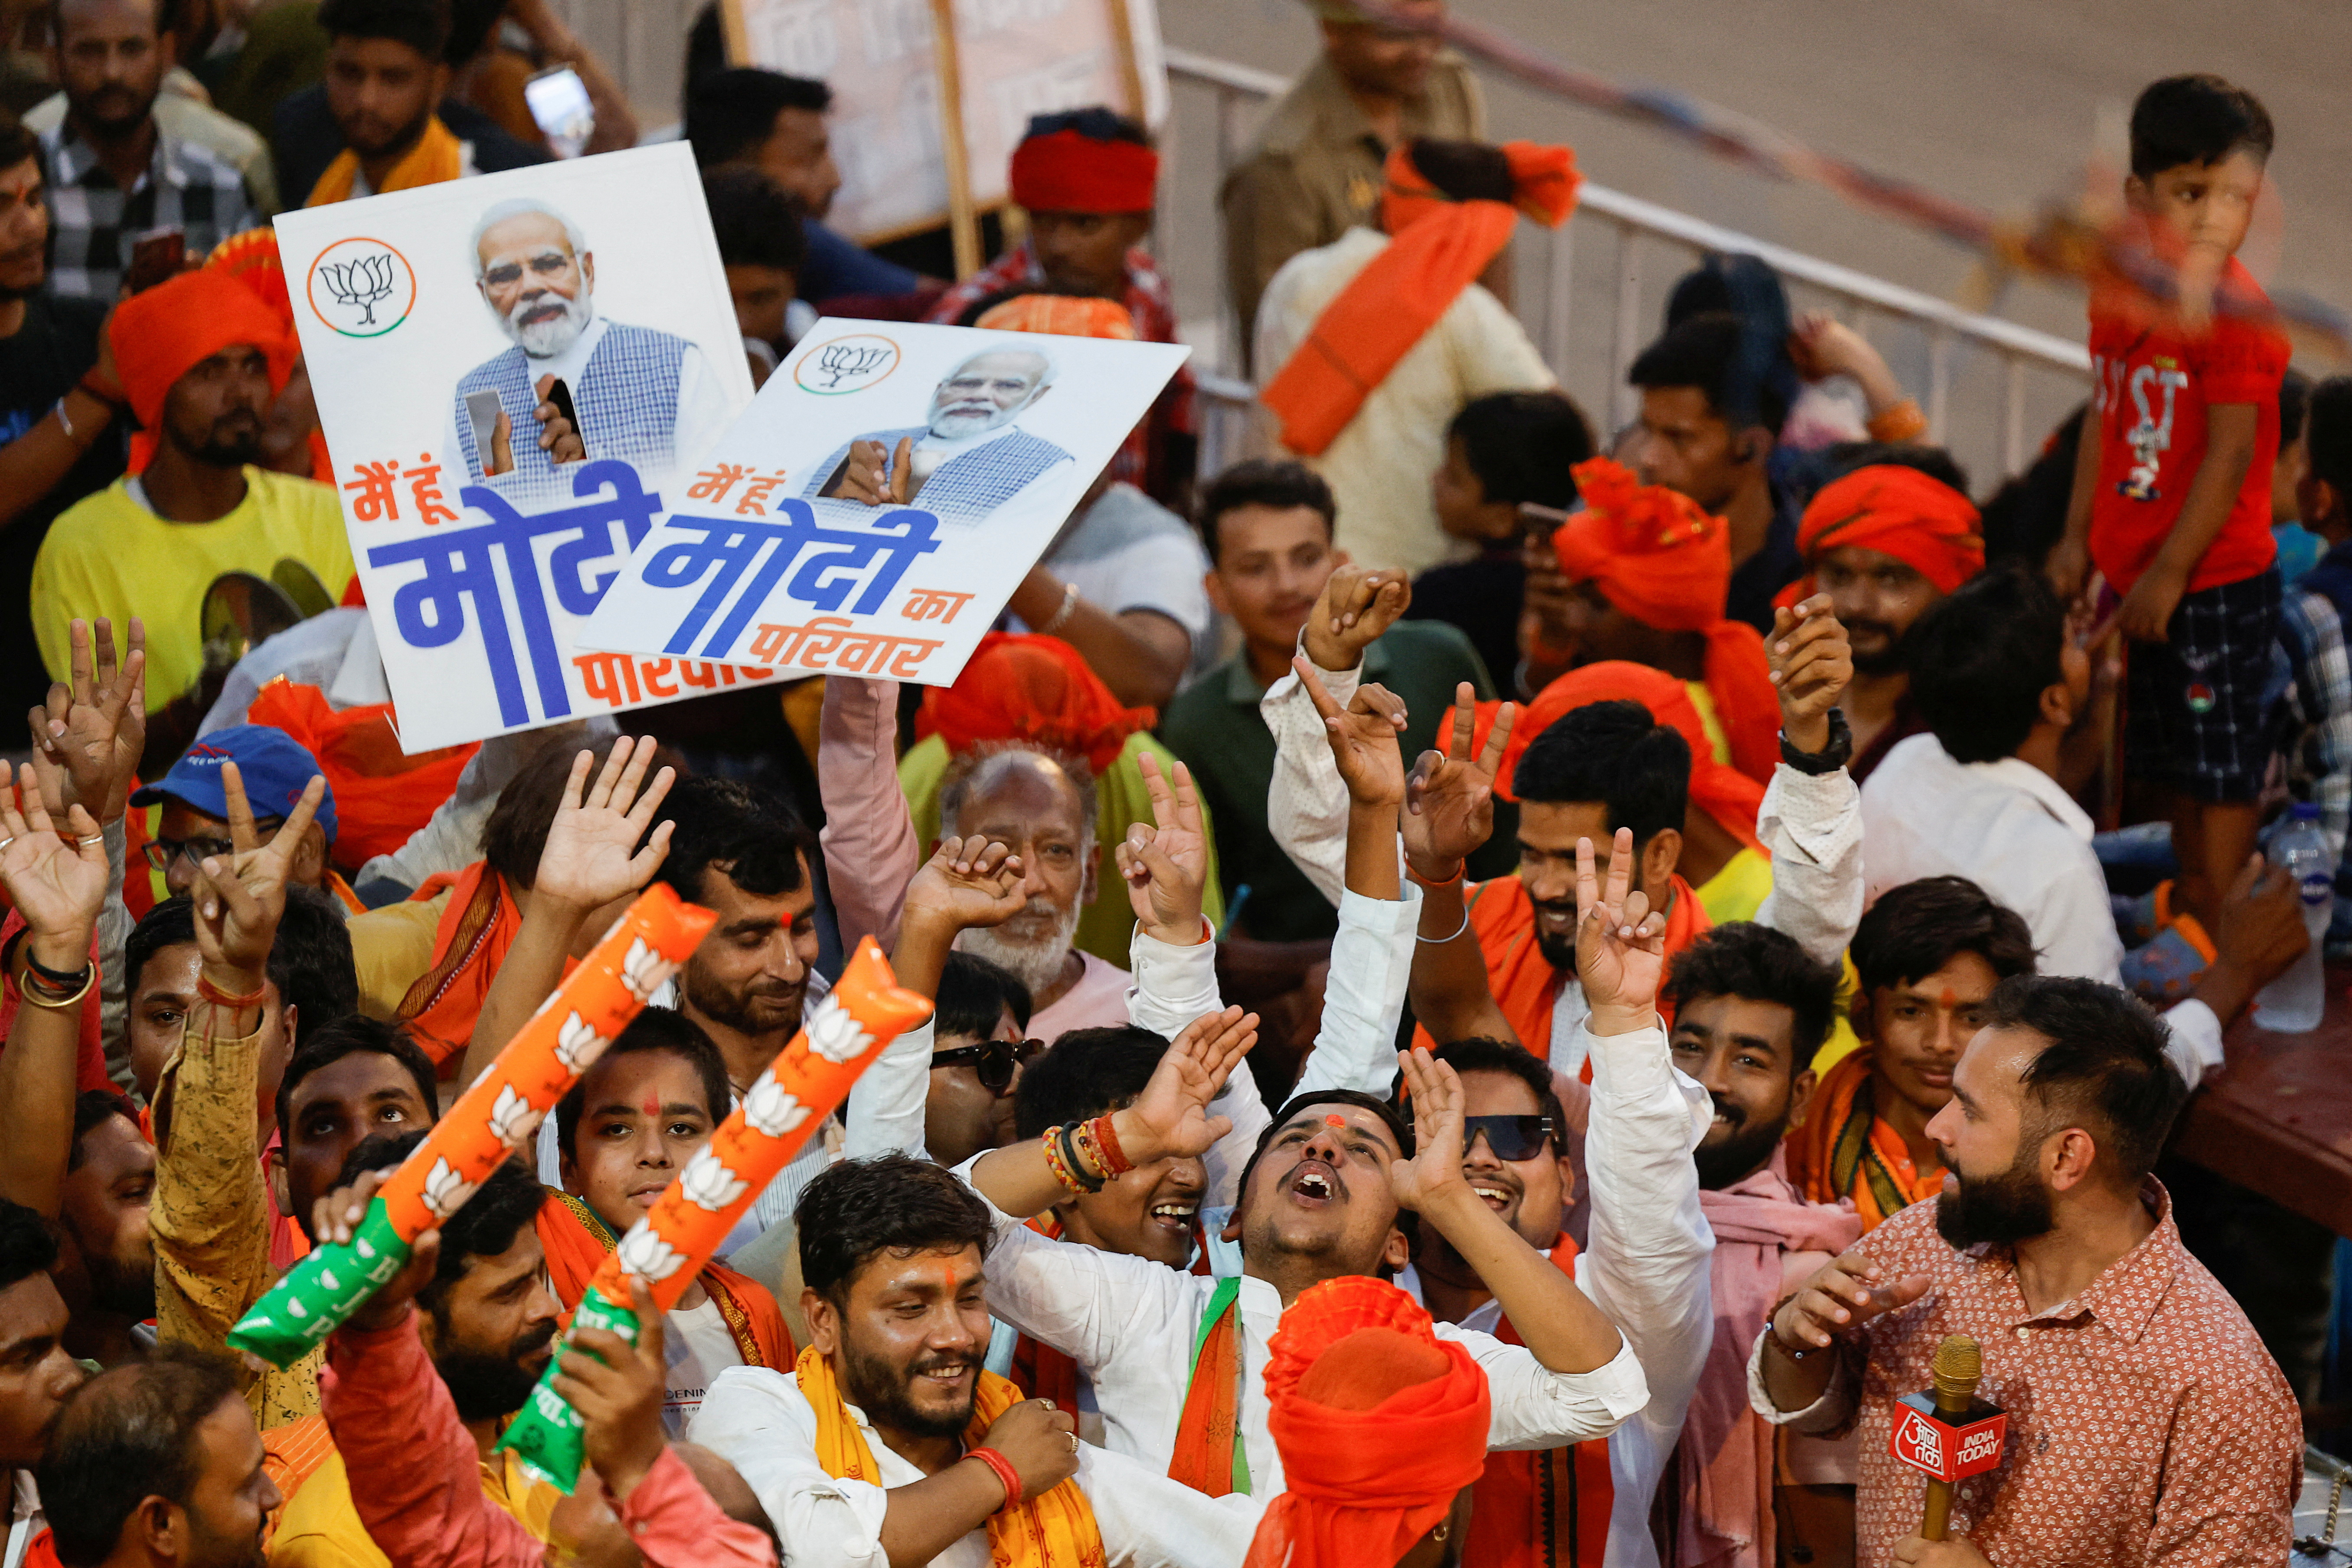 Supporters of India's Prime Minister Narendra Modi react, on the day of a Bharatiya Janata Party (BJP) election campaign rally in Ayodhya